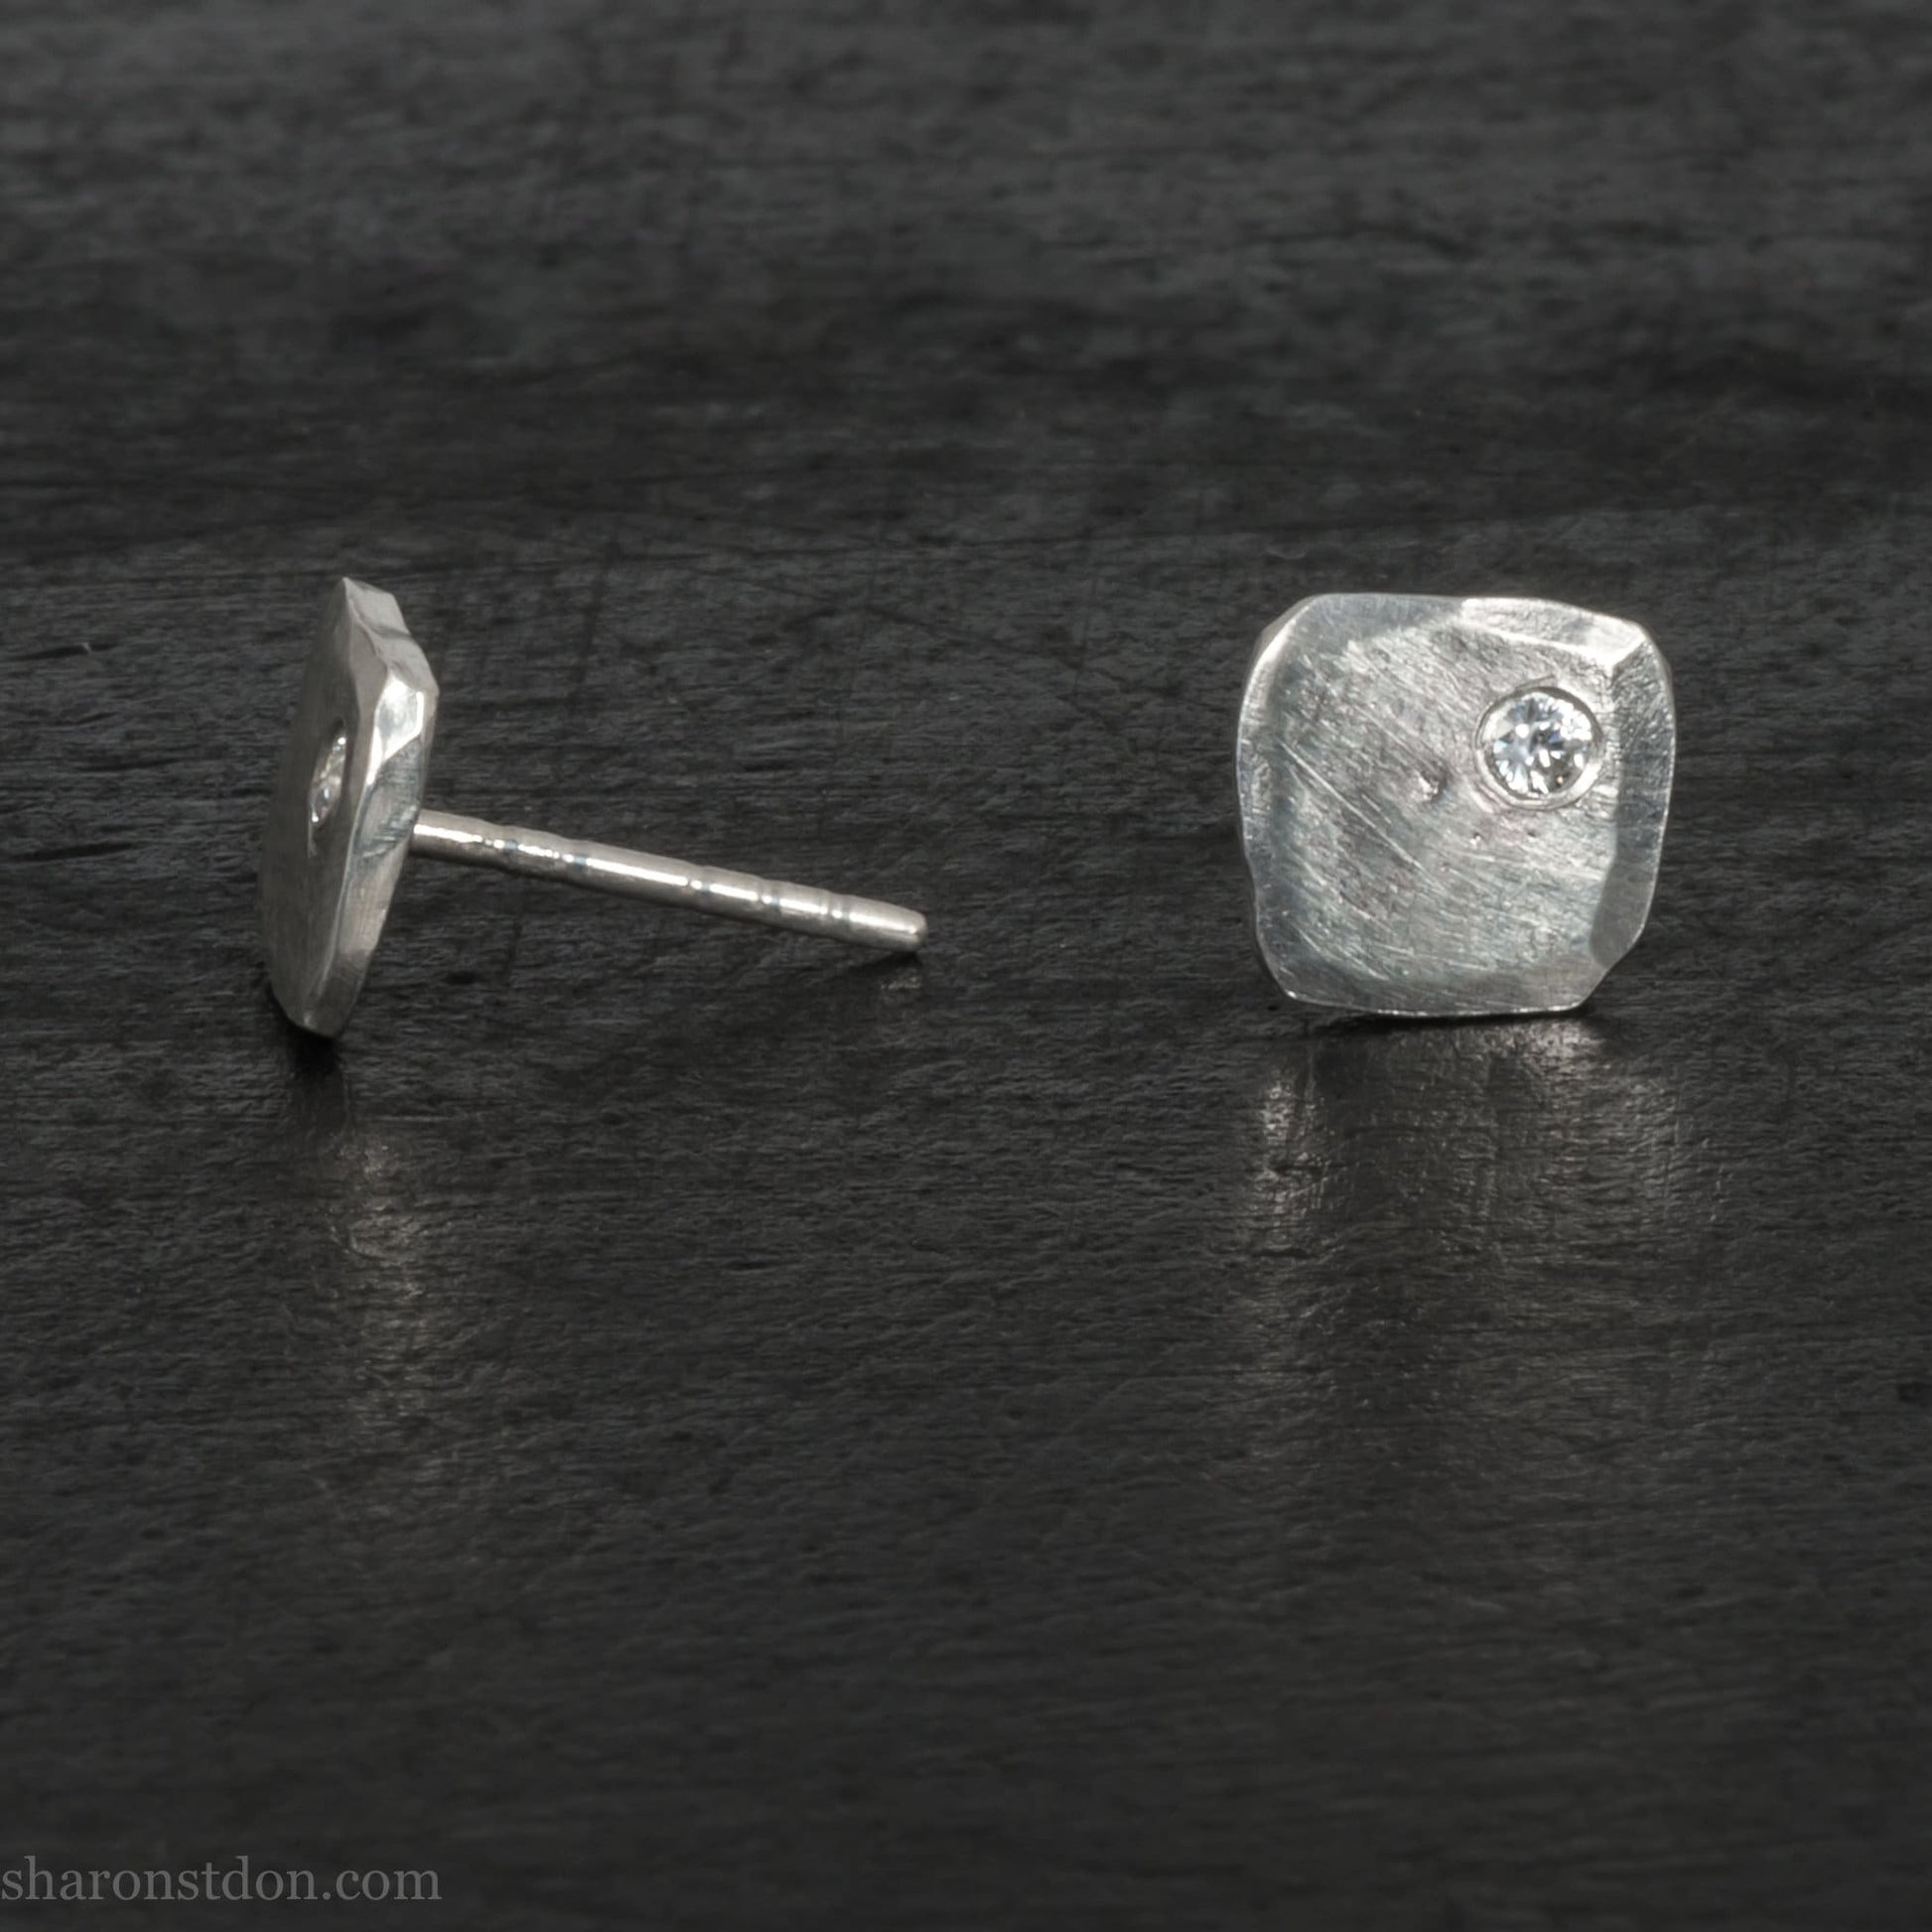 7mm square 925 sterling silver stud earrings with imitation diamond in the corner. Hammered texture with a matte, shiny finish. Handmade by Sharon SaintDon in North America for men or women.